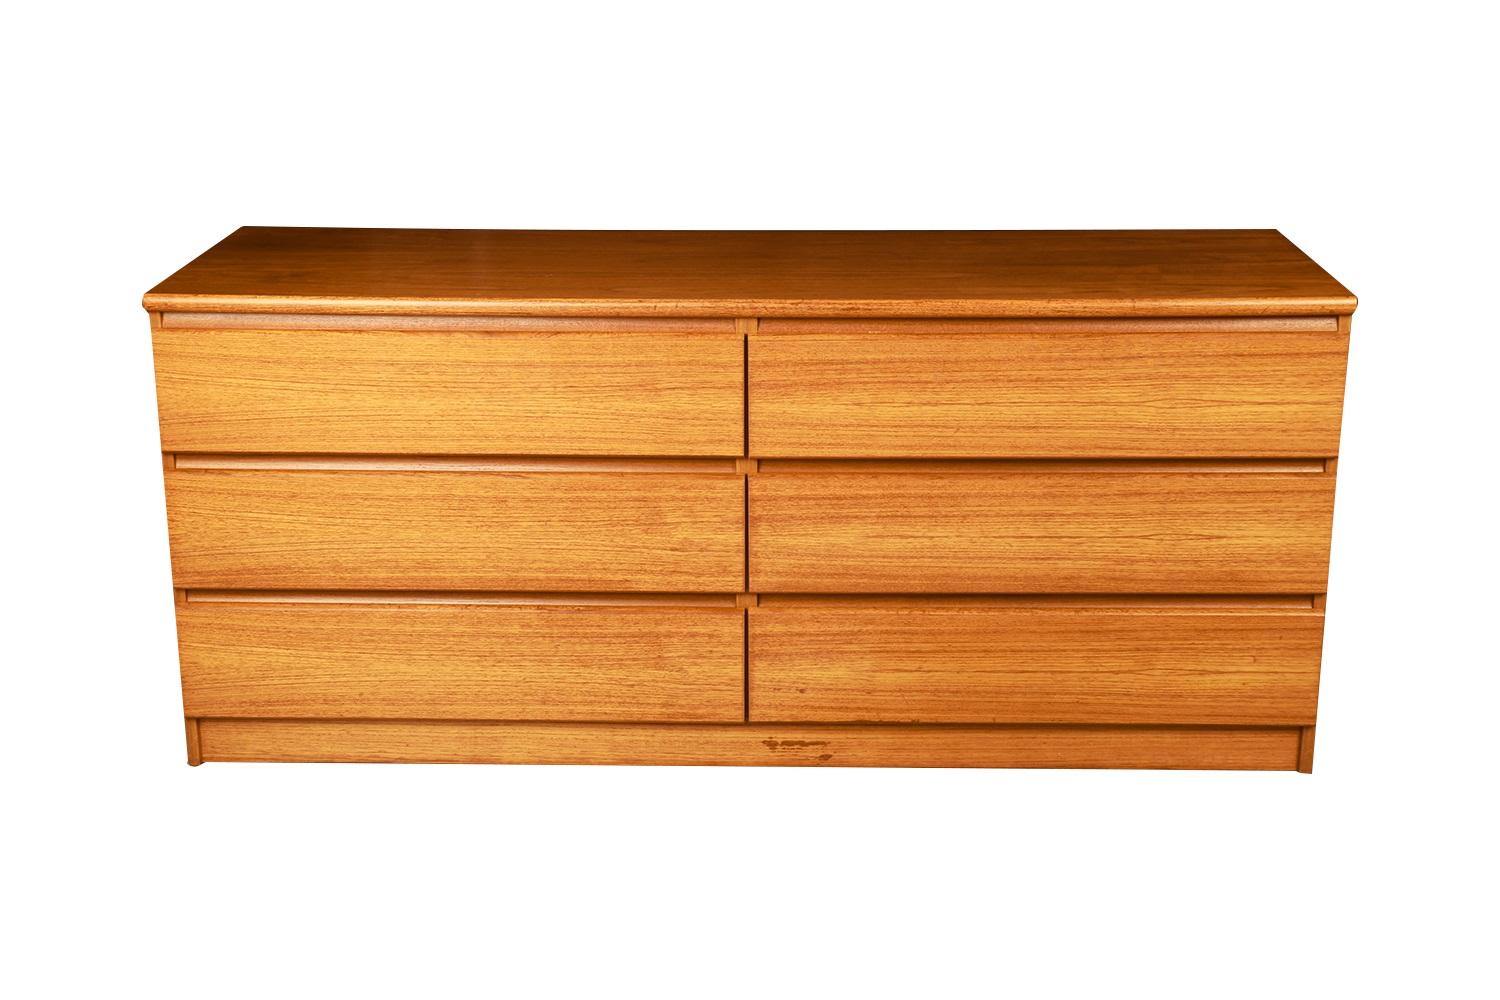 Attractive long low Danish modern sleek smooth face teak 6 long low dresser. This is a very simple yet modern 6 drawer design. Each drawer has beautiful medium tone stunning teak grains with attractive inset slit drawers carved out minimal pulls. At